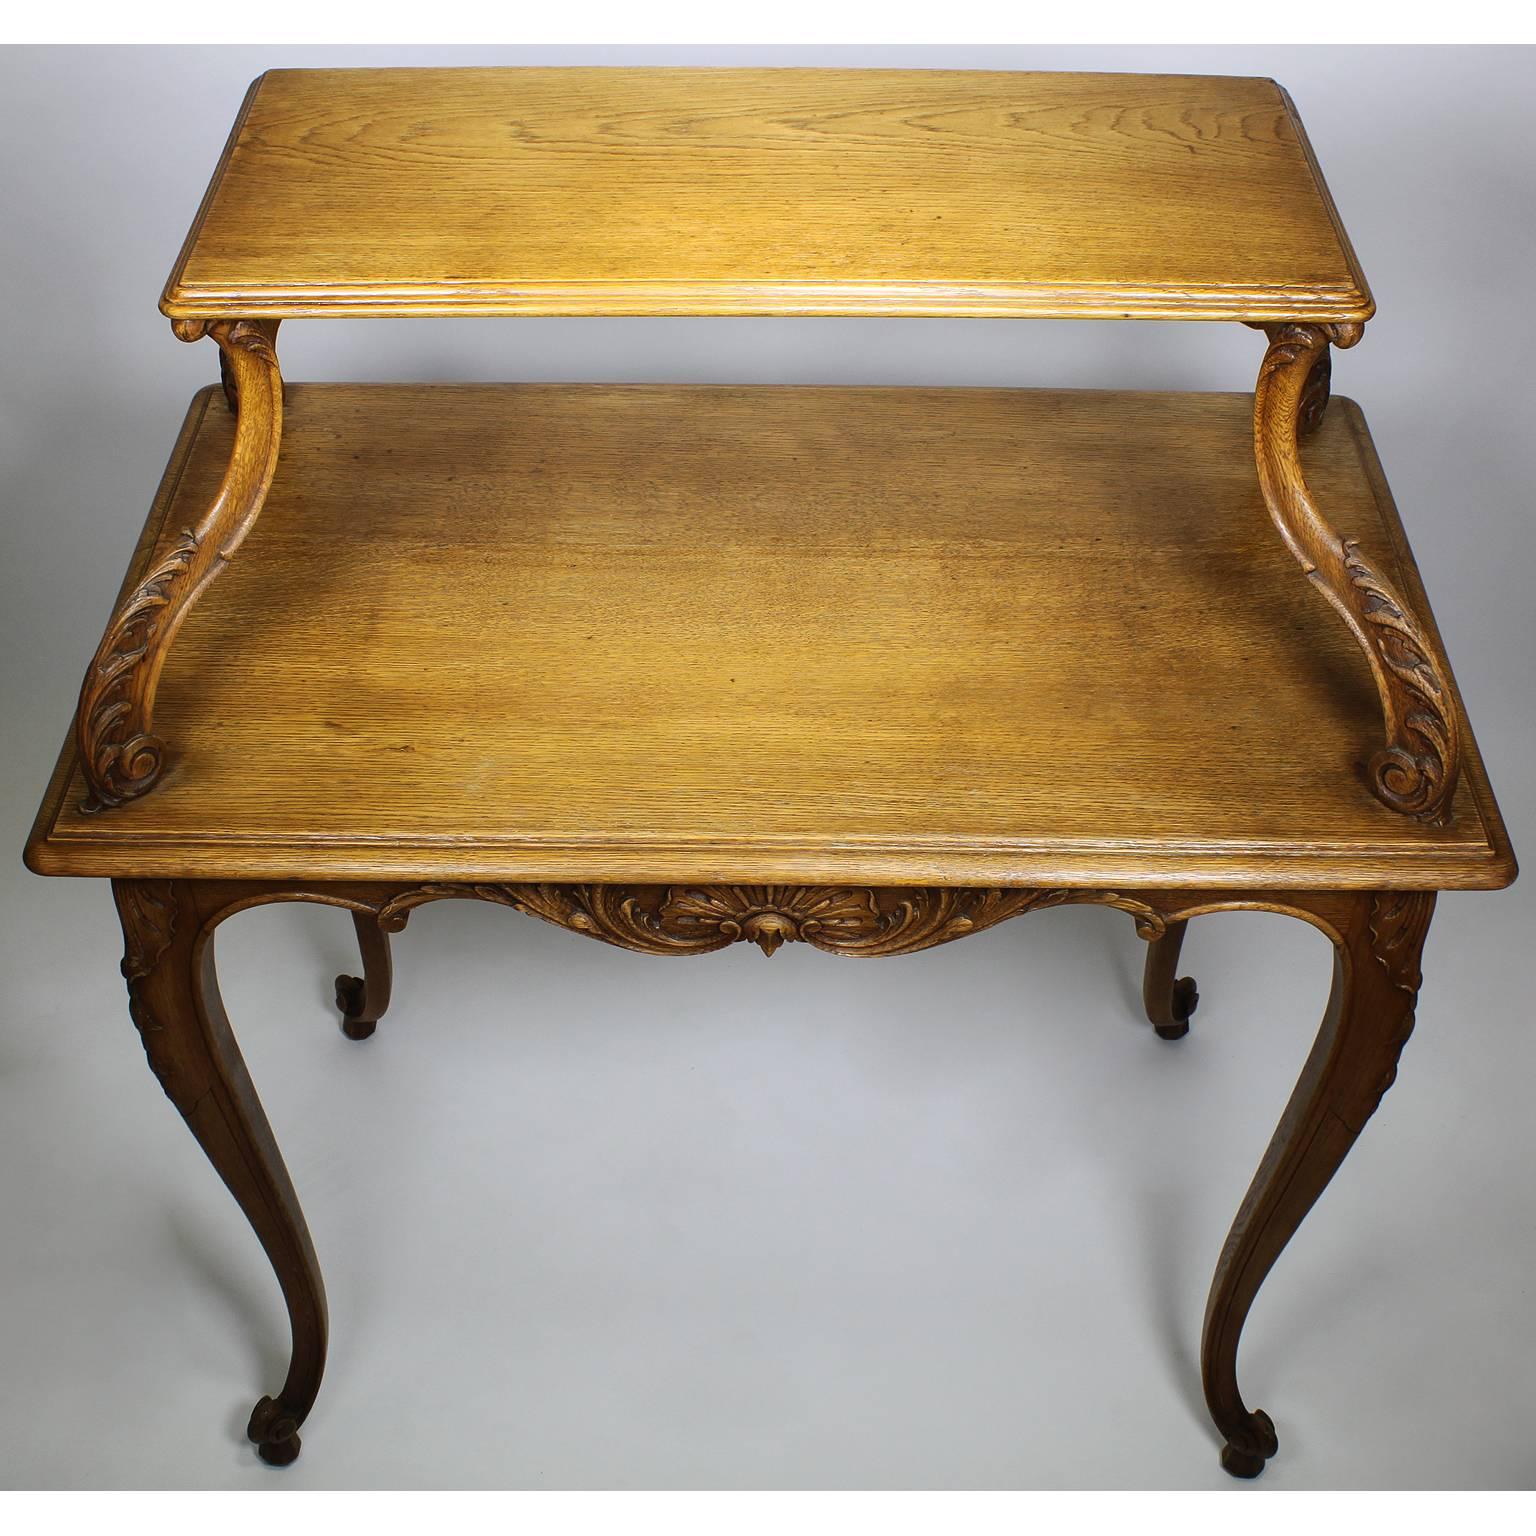 French 19th-20th Century Louis XV Style Carved Oak Two-Tier Tea or Dessert Table For Sale 3